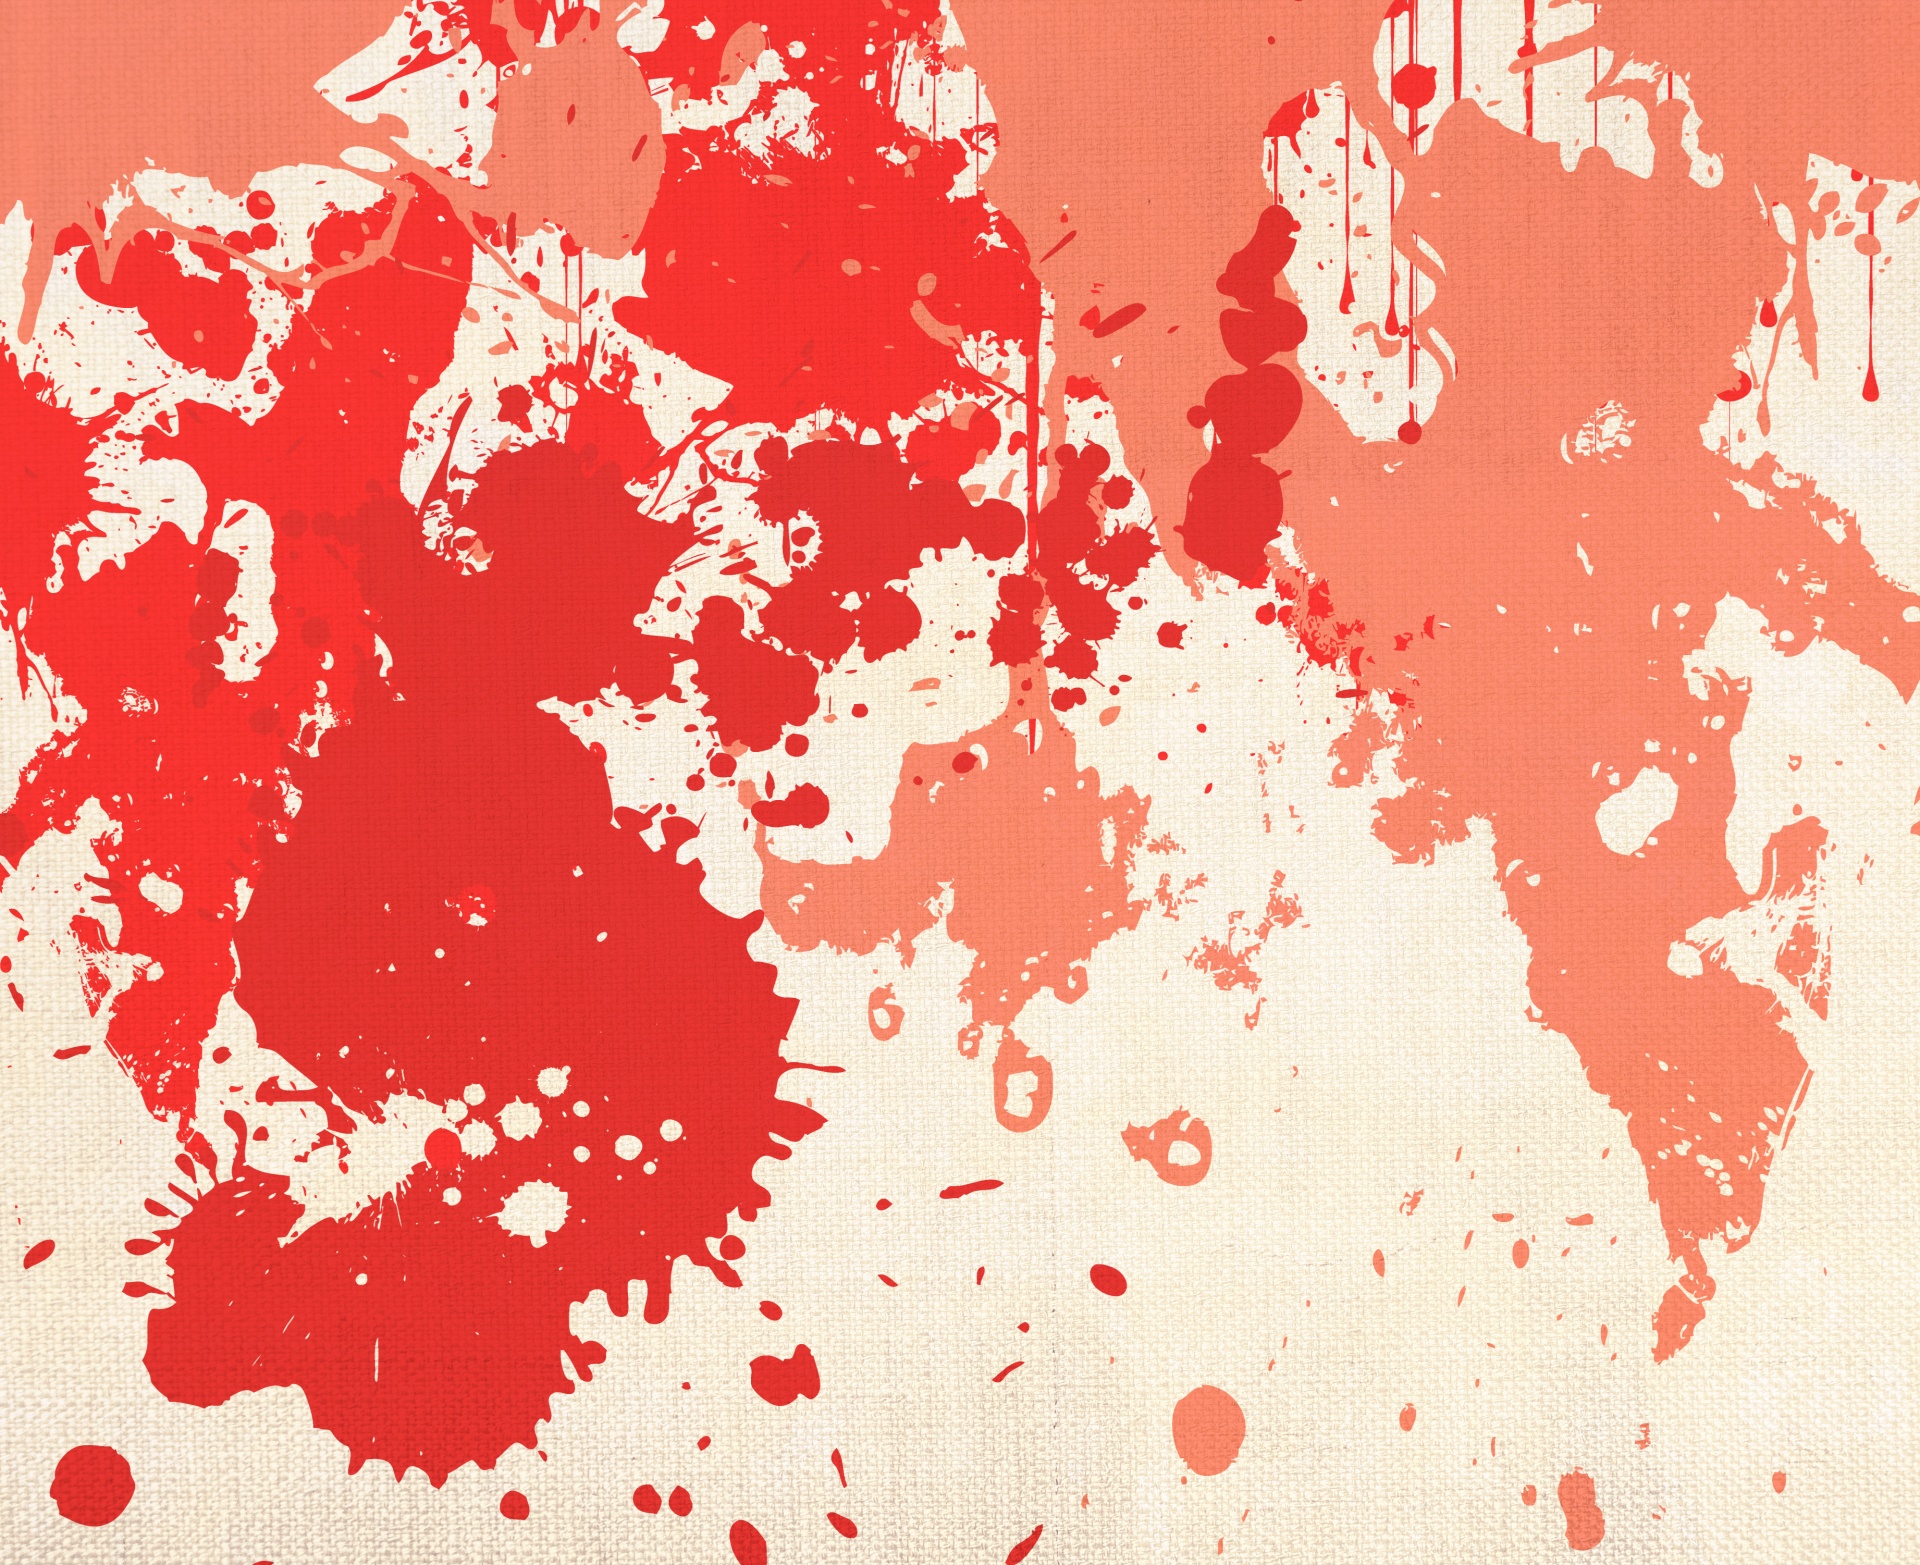 Red paint splatters on a canvas background